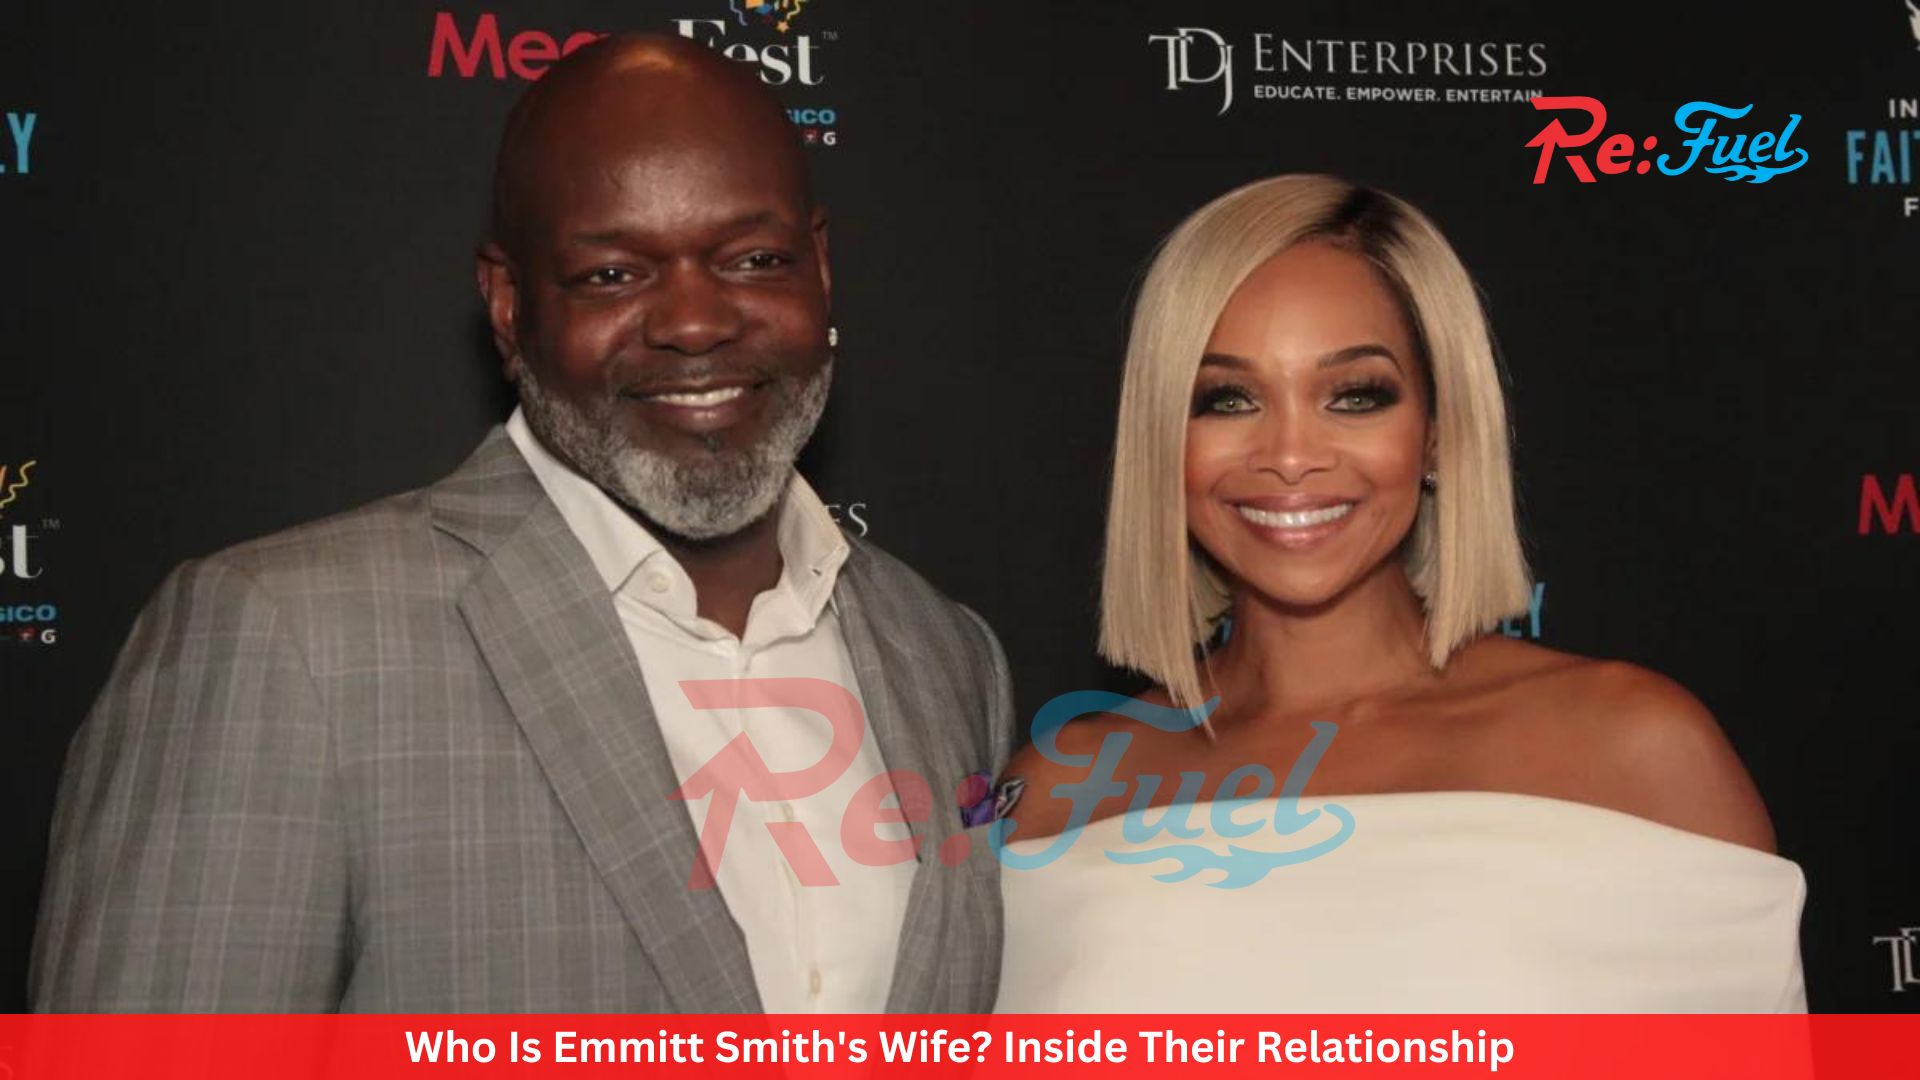 Who Is Emmitt Smith's Wife? Inside Their Relationship